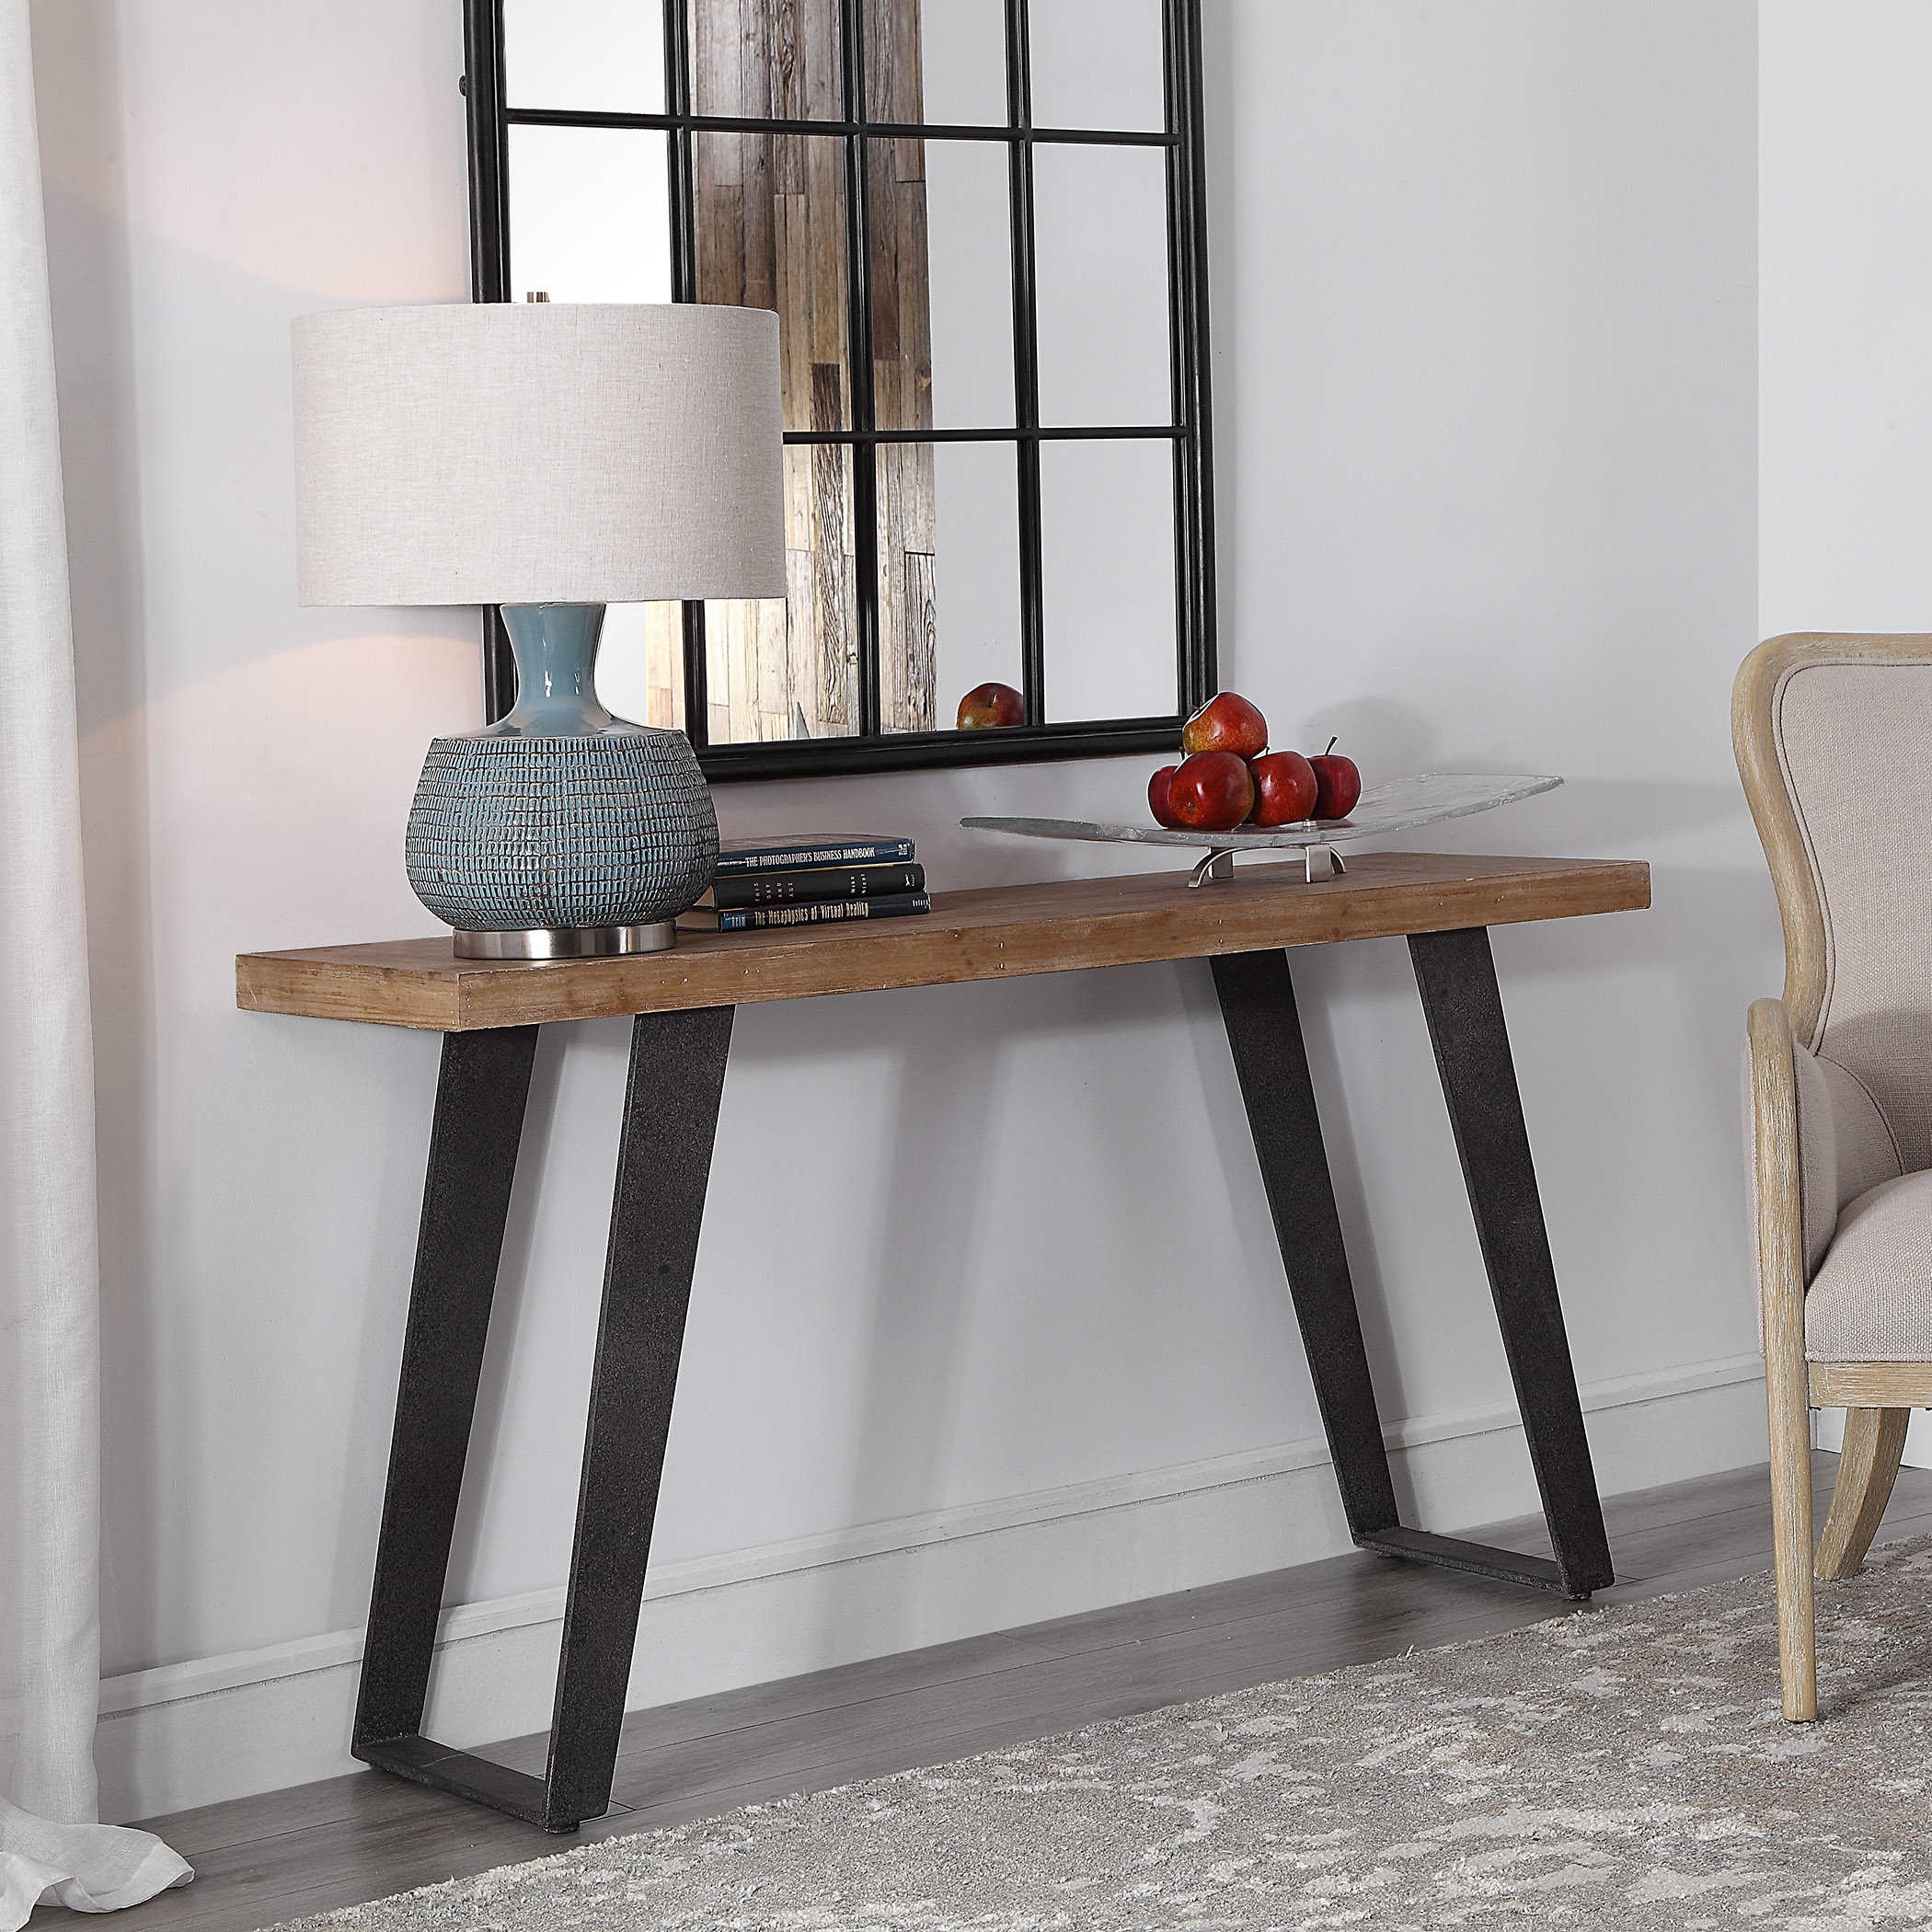 Freddy Console Table - Image 2